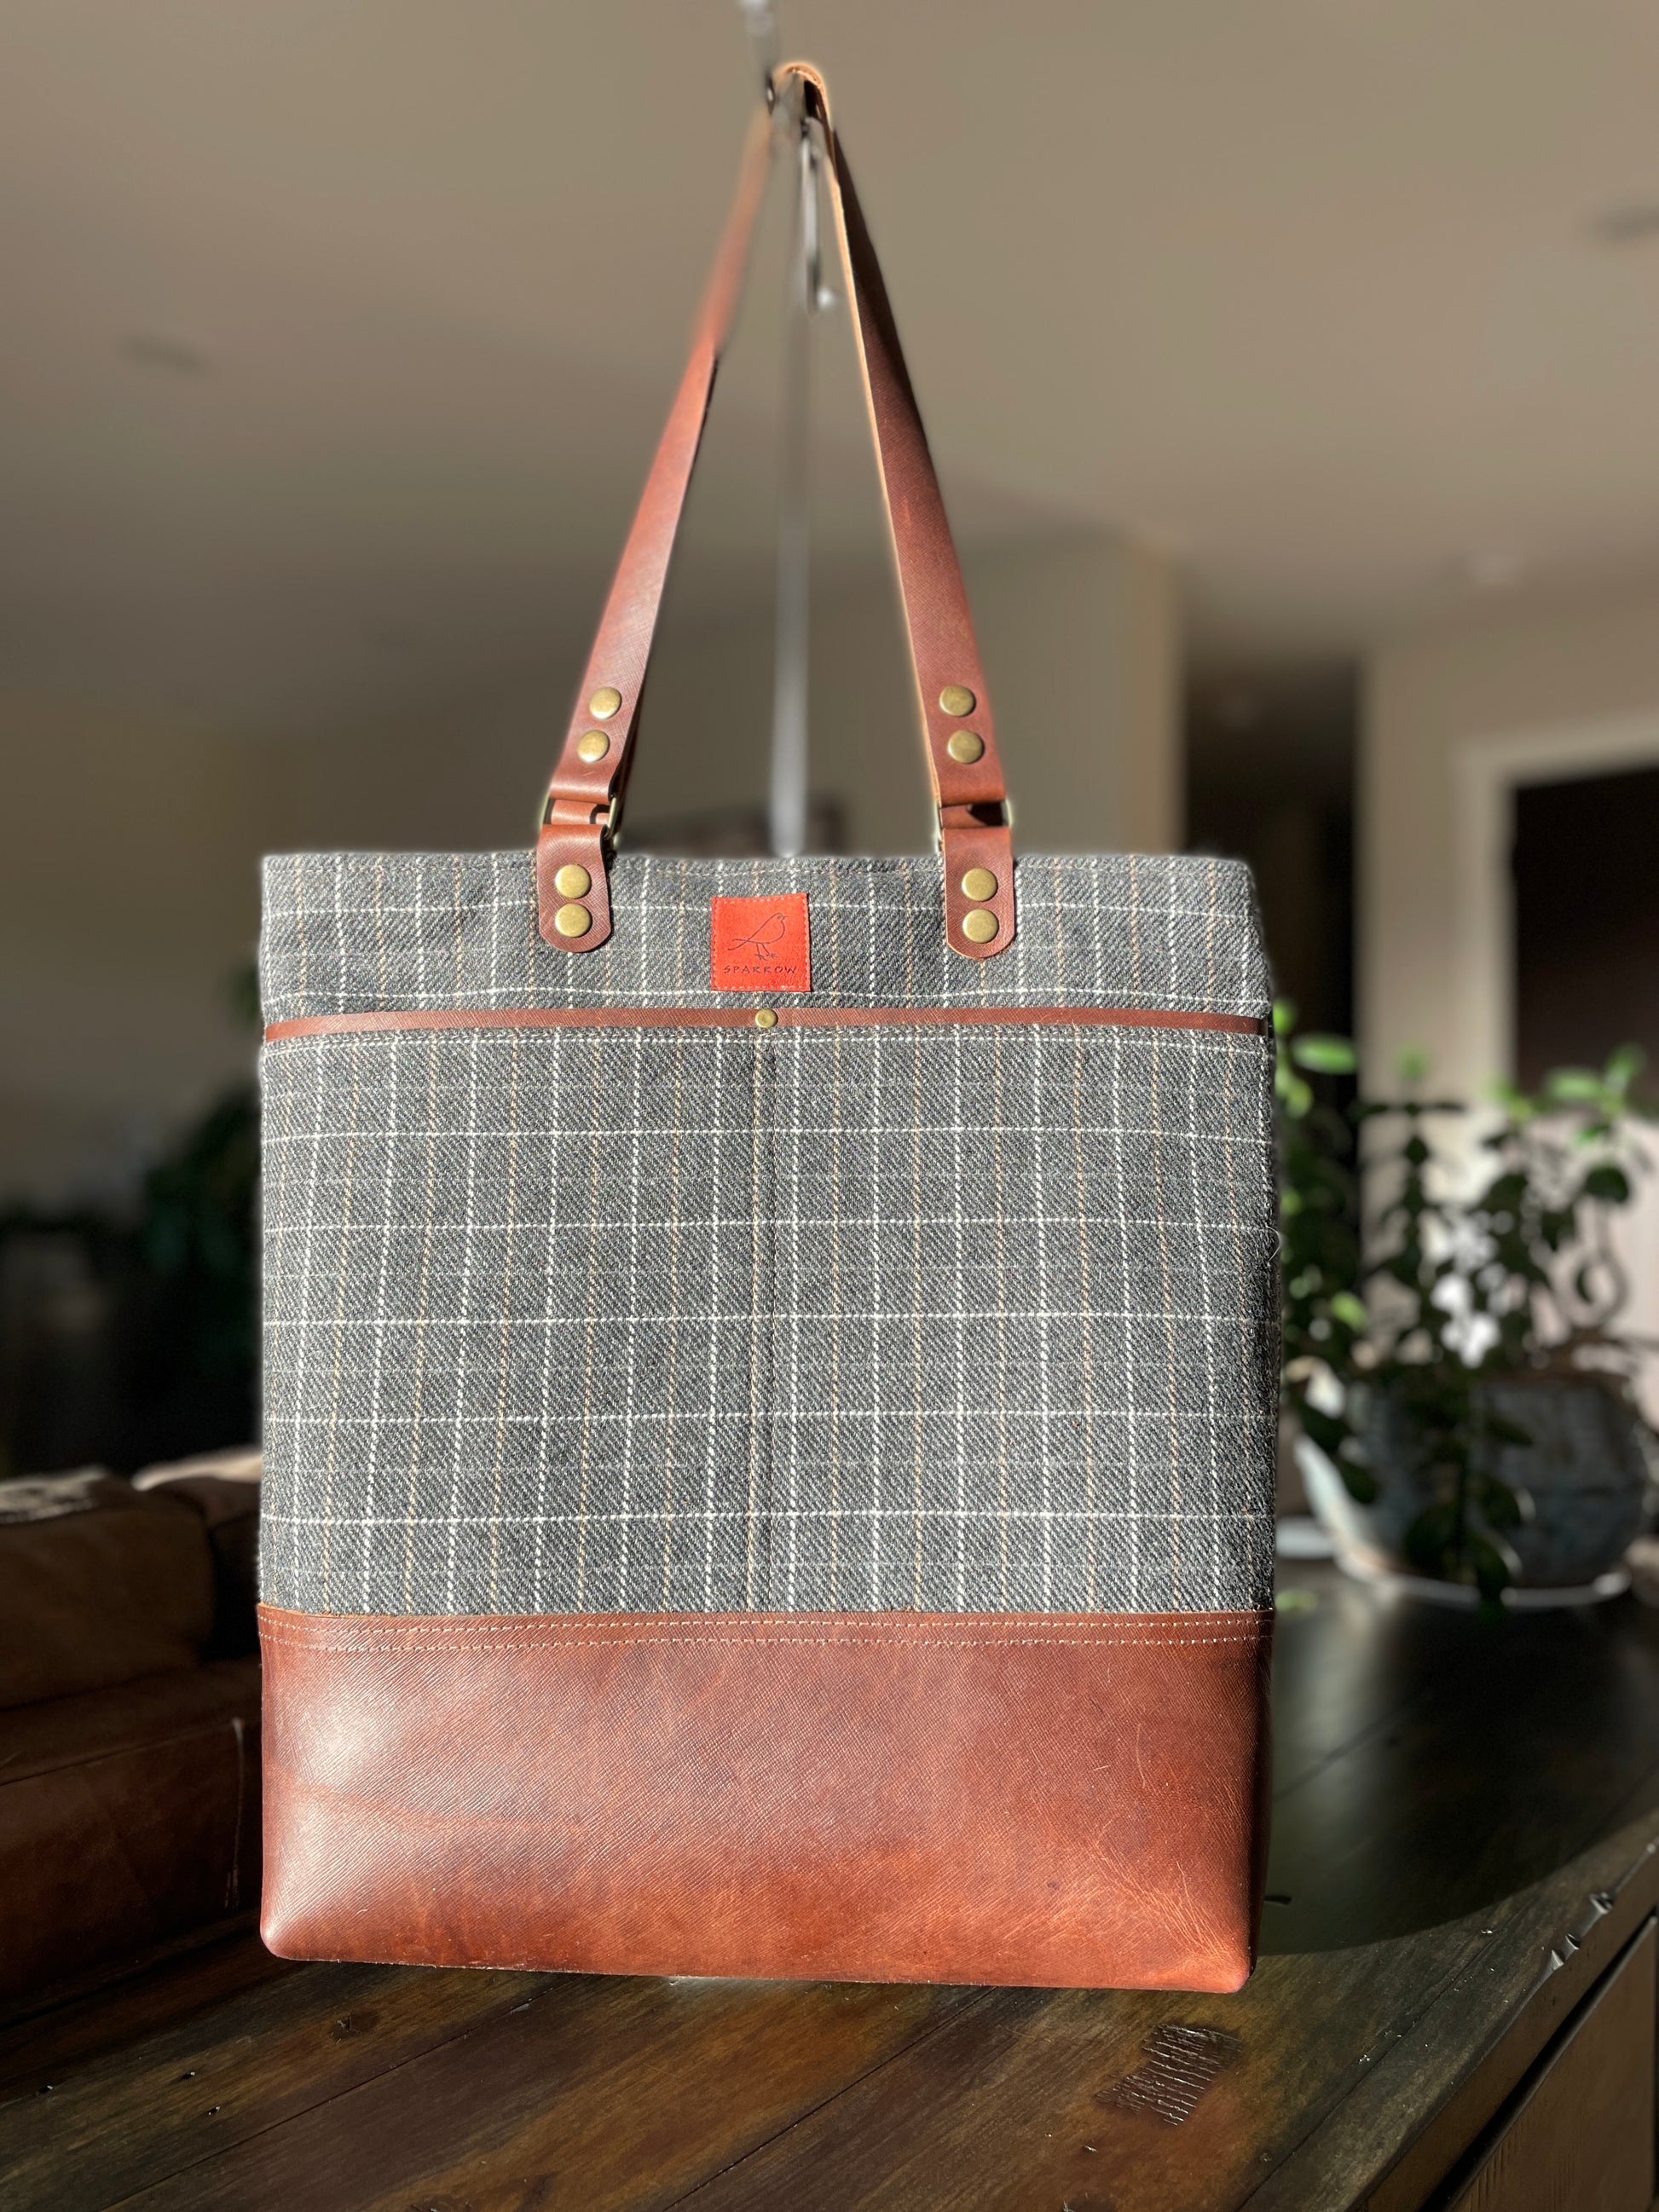 Classic tote bag with grey checkered wool upper, brown leather base and straps. Two front slip pockets, 1 back leather slip pocket, fully lined with slip pockets and zippered pocket inside. Very classic, timeless style. 